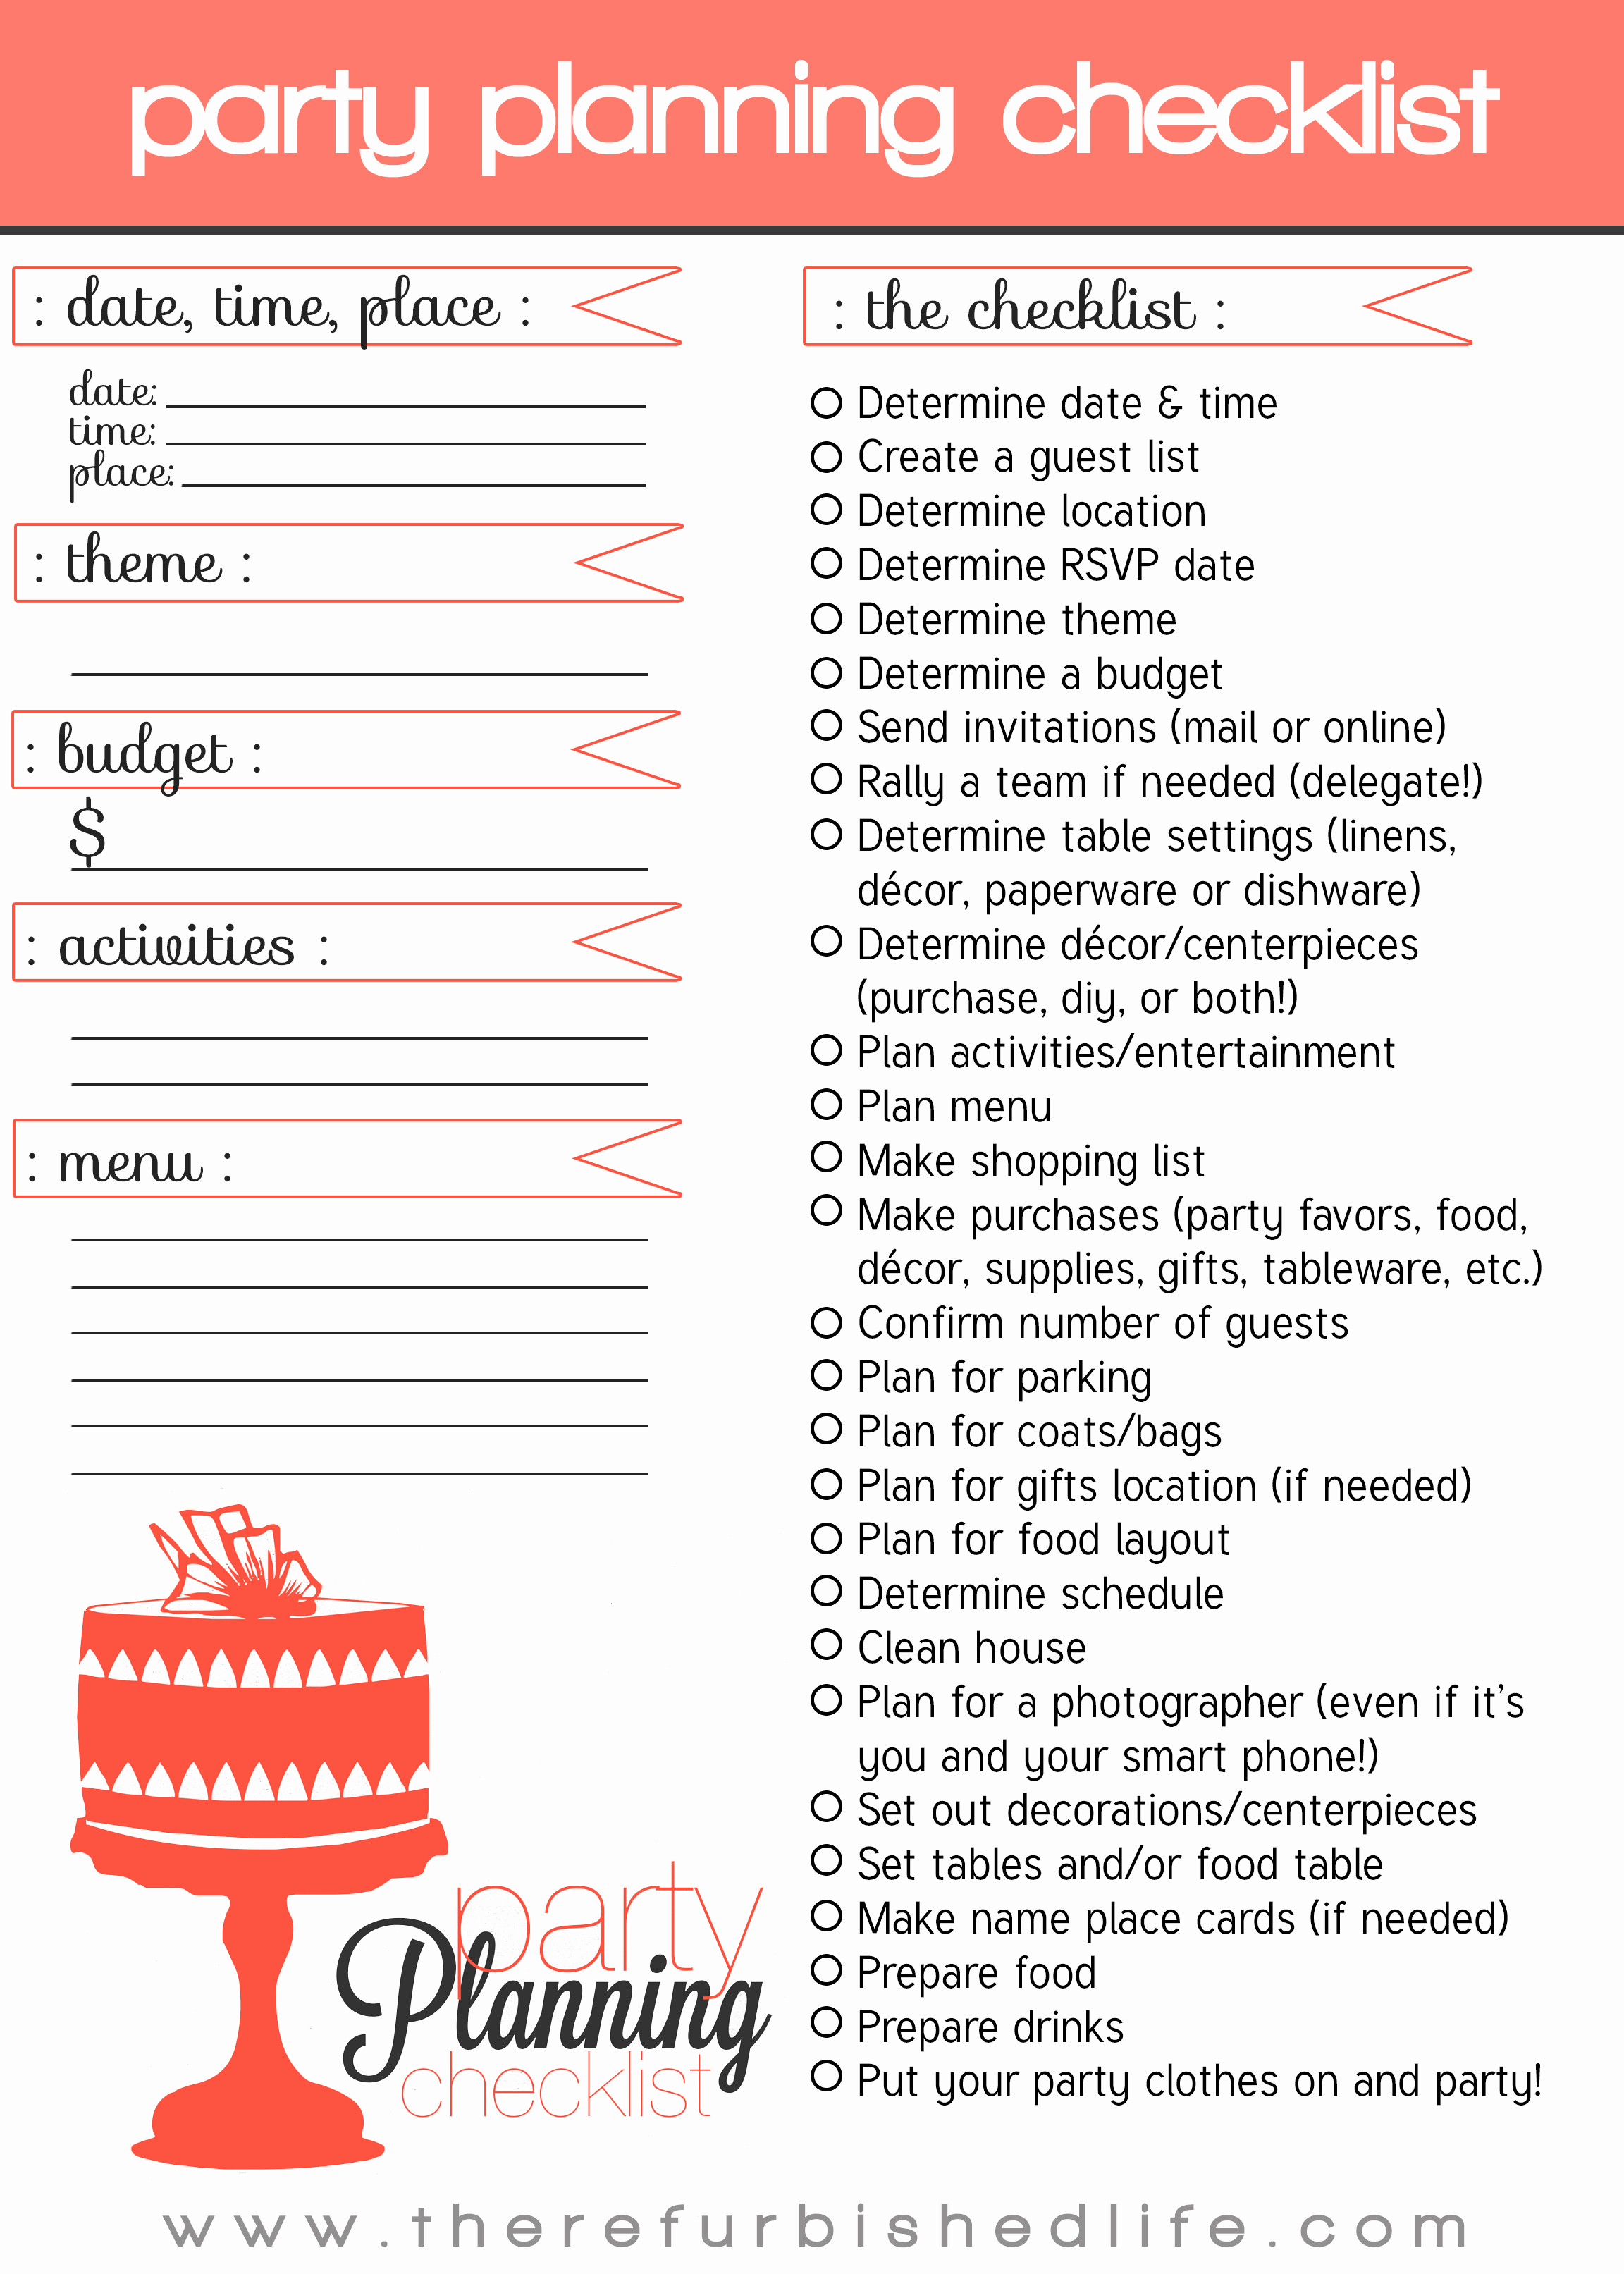 Event Planning Checklist Template Inspirational Party Planning 101 with Printable Checklist – the